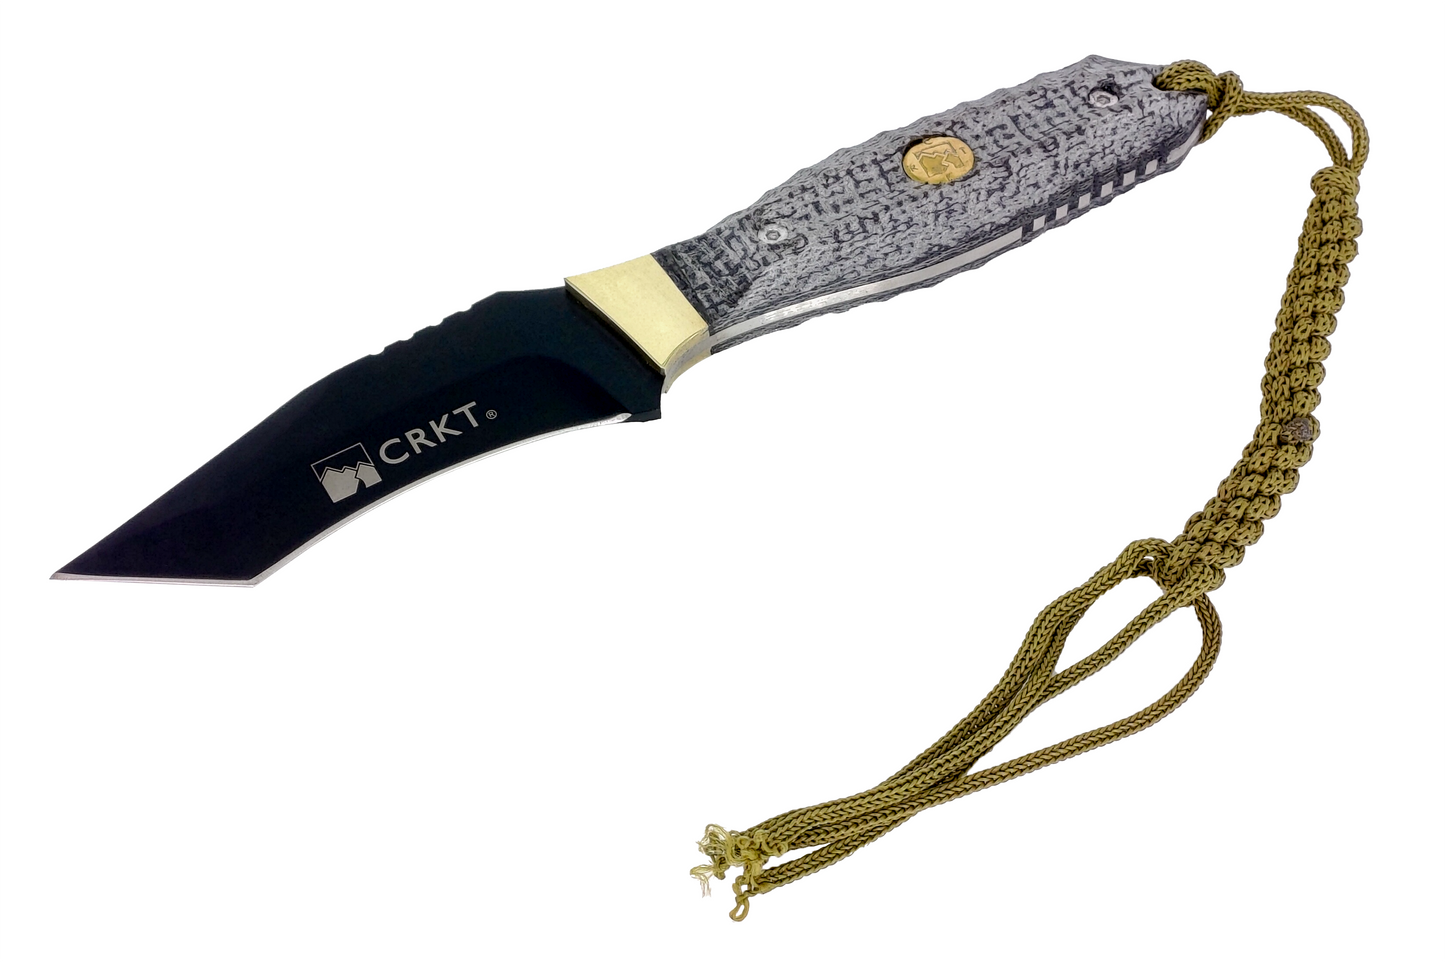 CRKT FIXED BLADE SURVIVAL HUNTING KNIFE